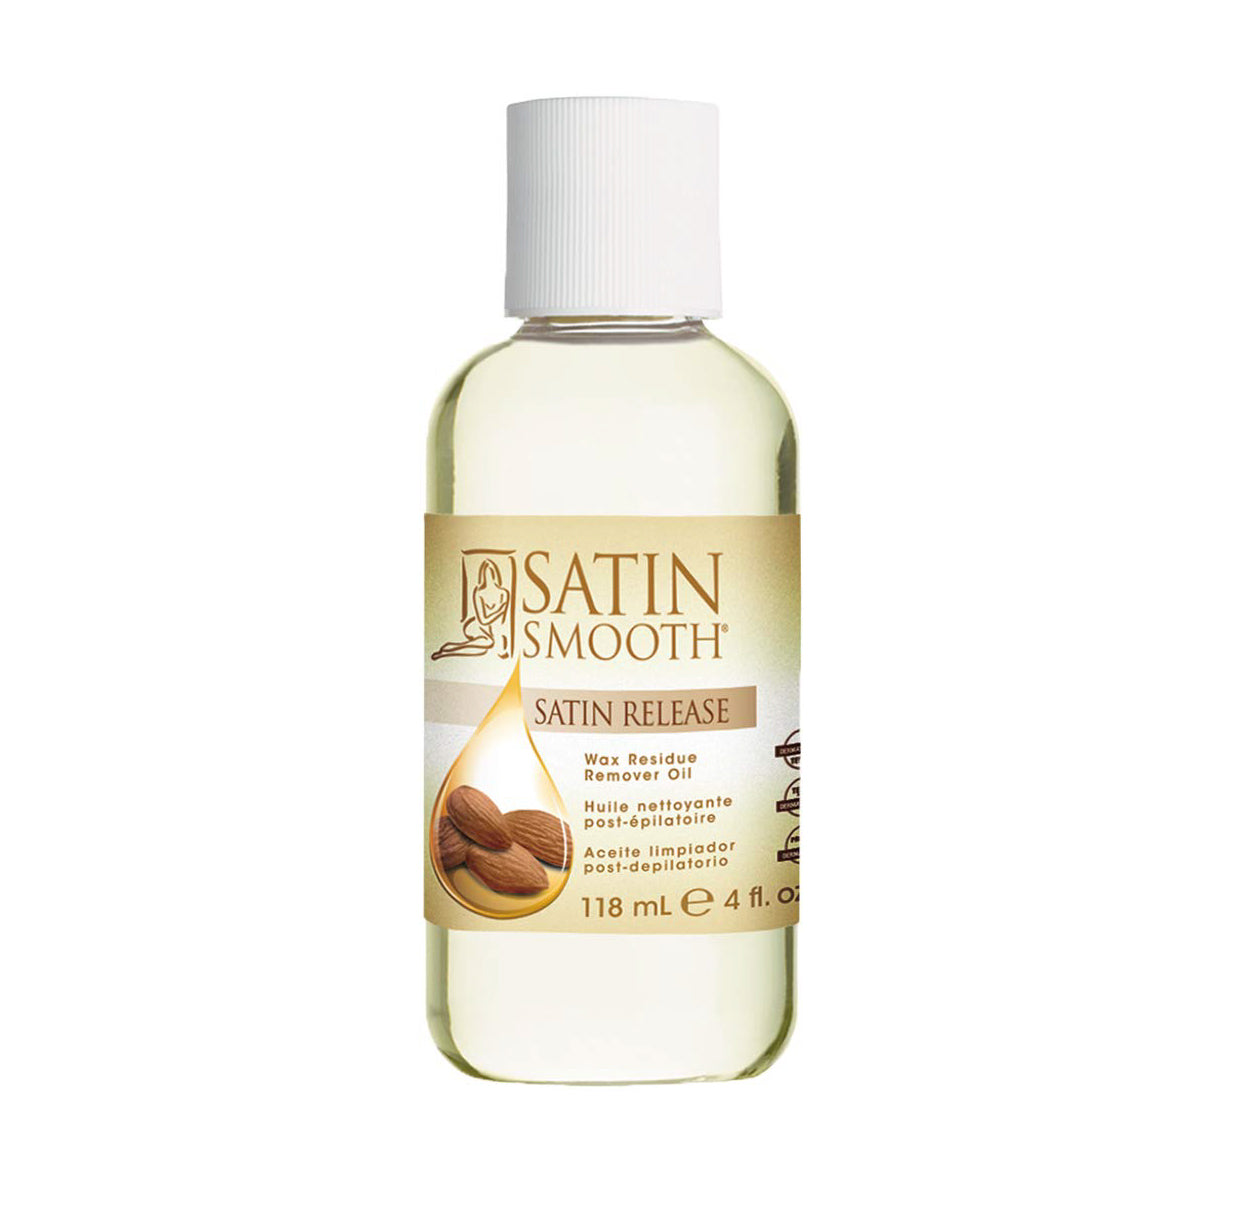 Satin Smooth - Satin Release Wax Residue Remover Oil